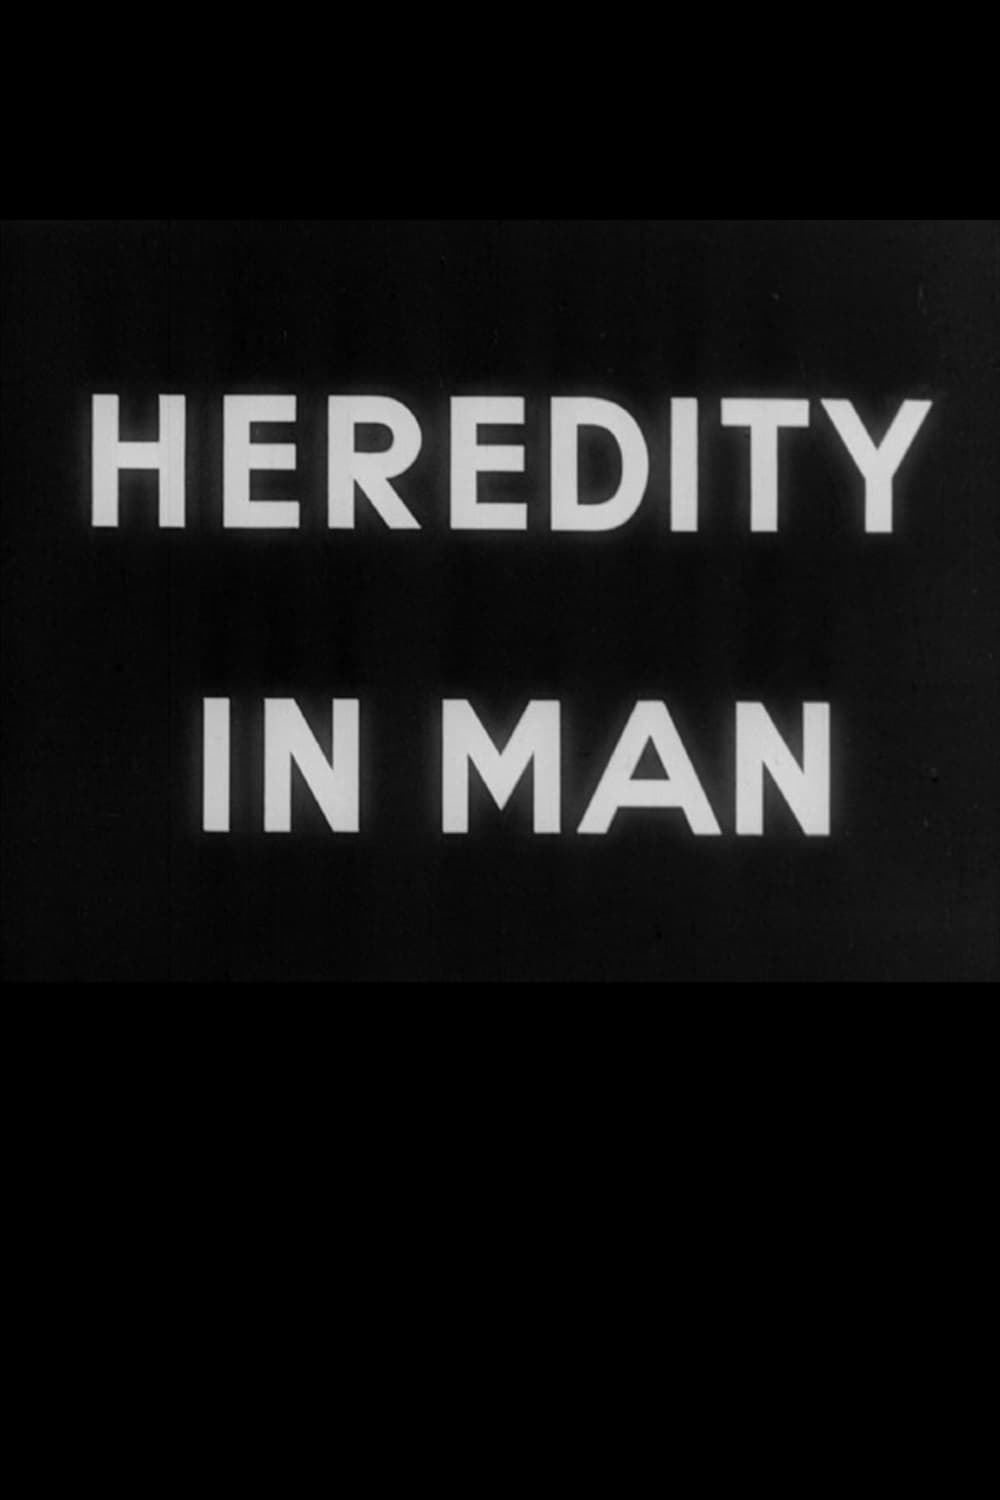 Heredity in Man